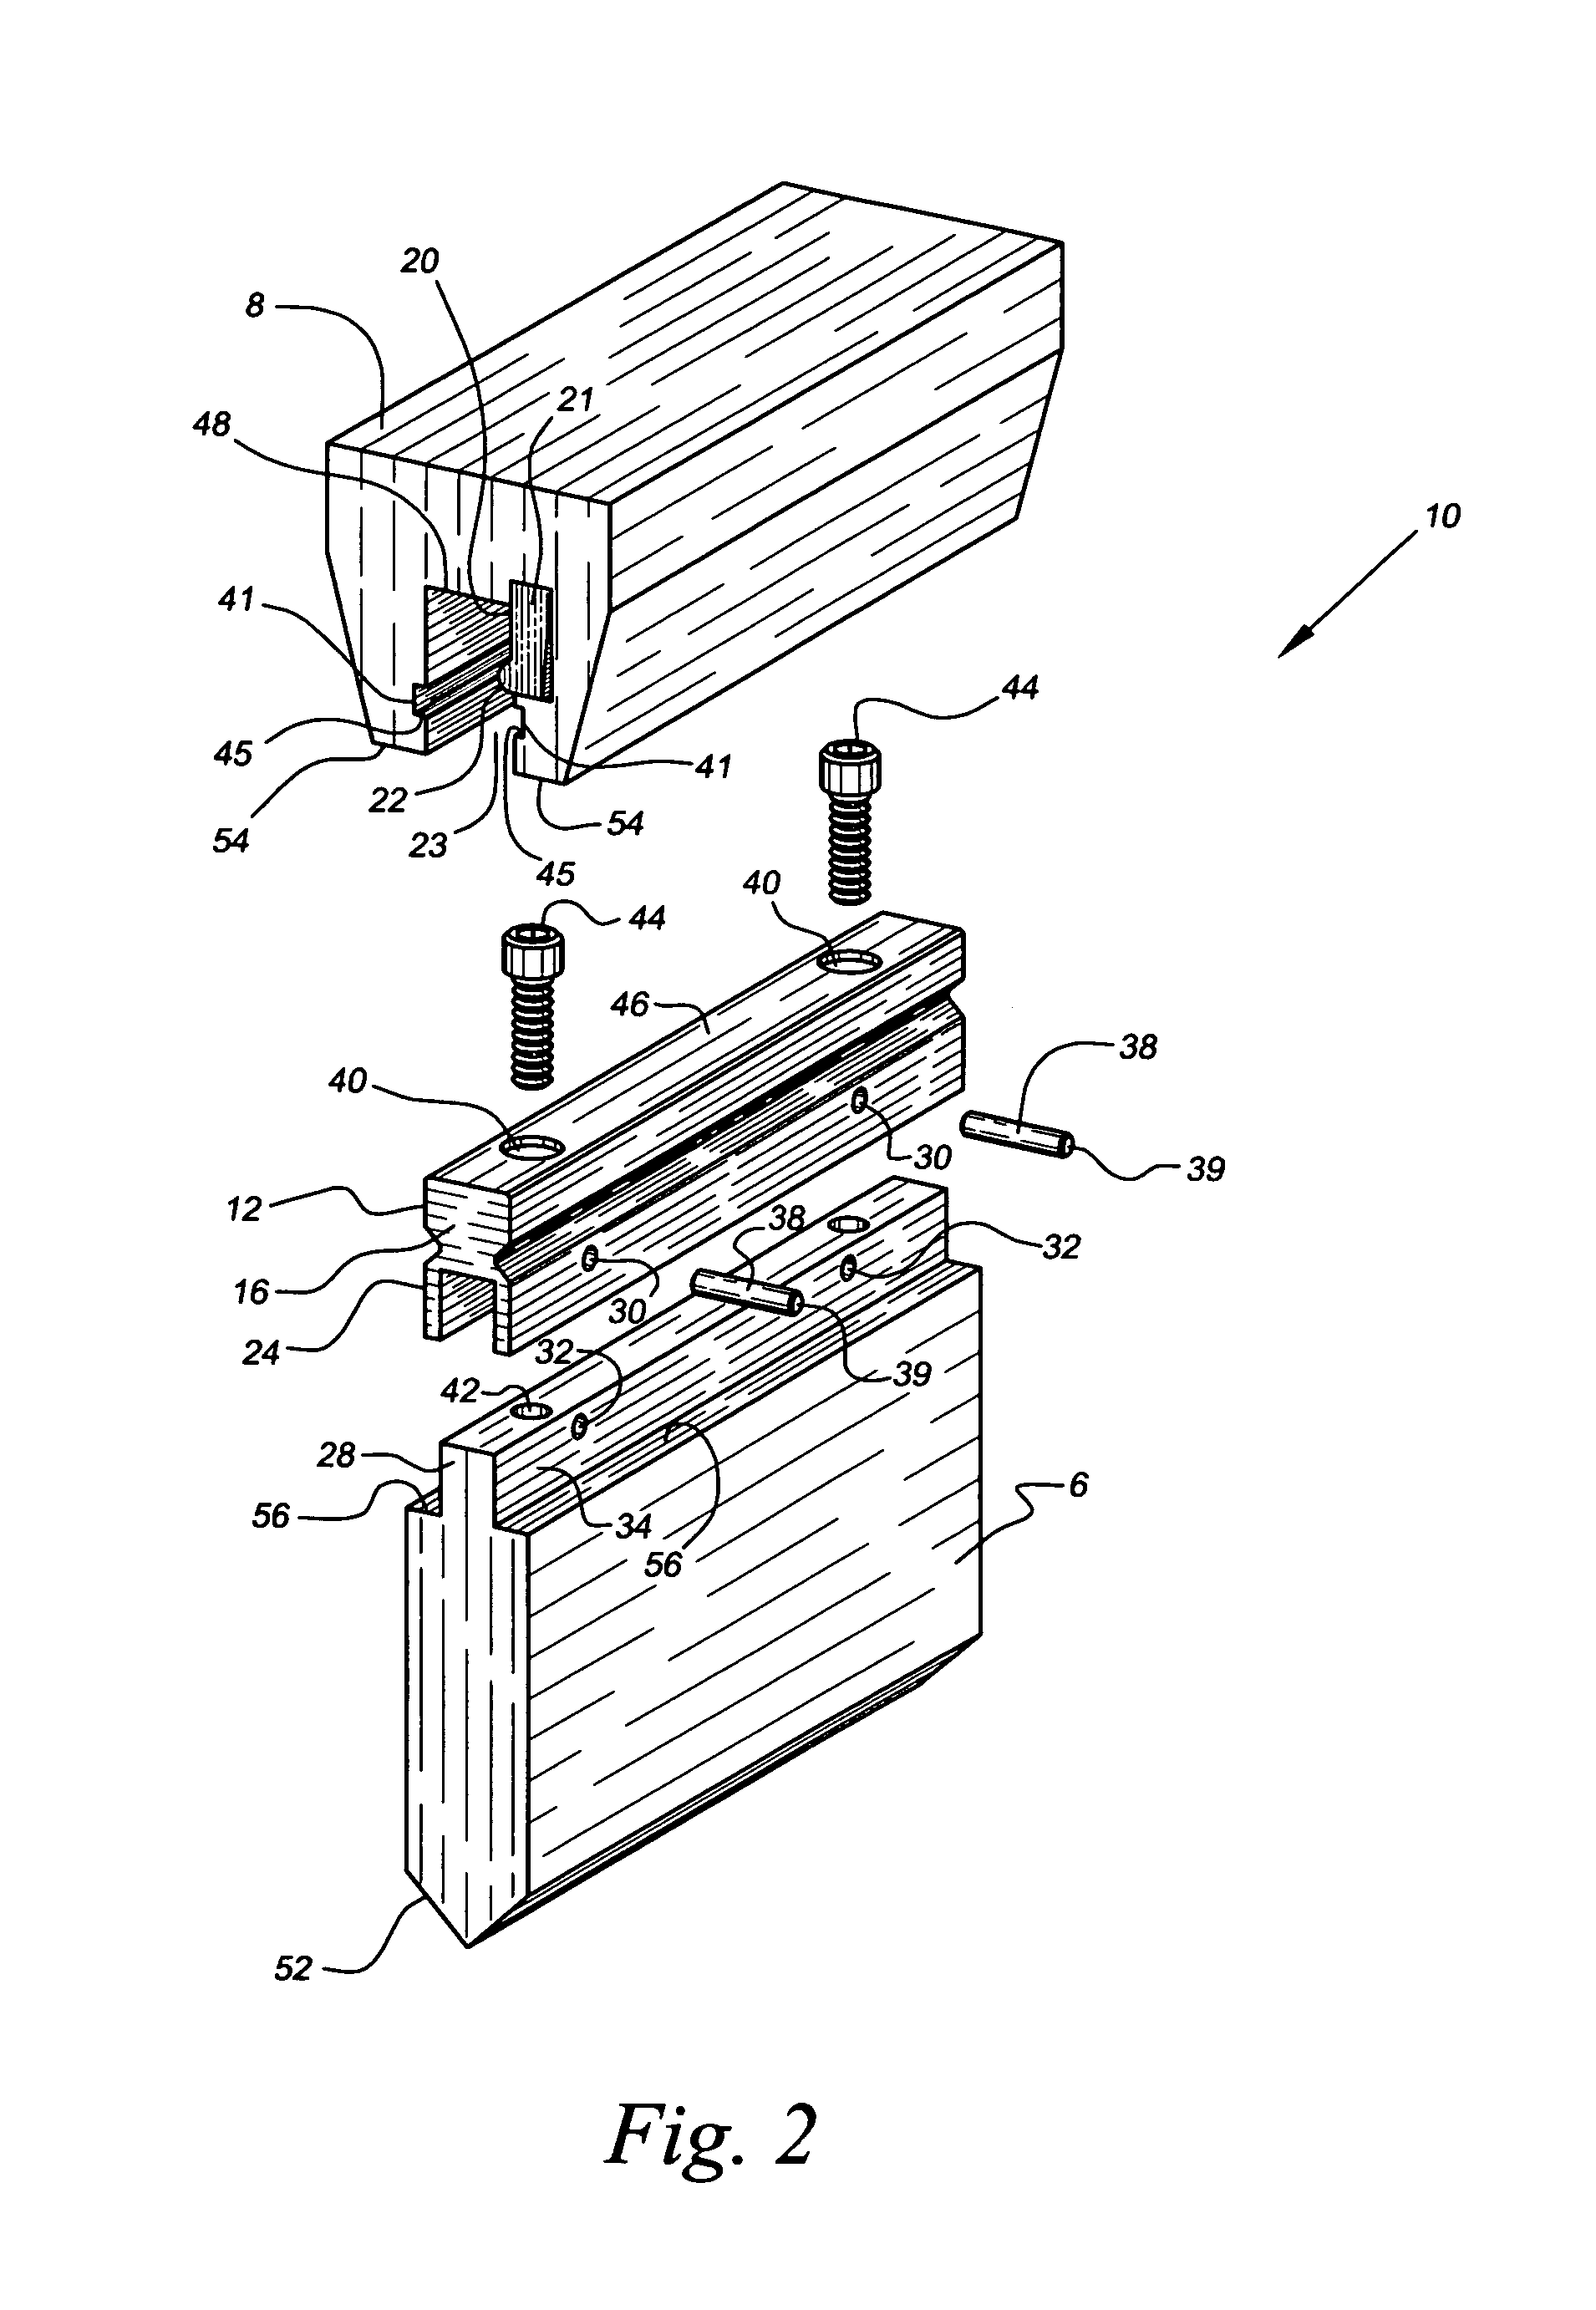 Device and method for securing a punch tool to a ram portion of a press brake